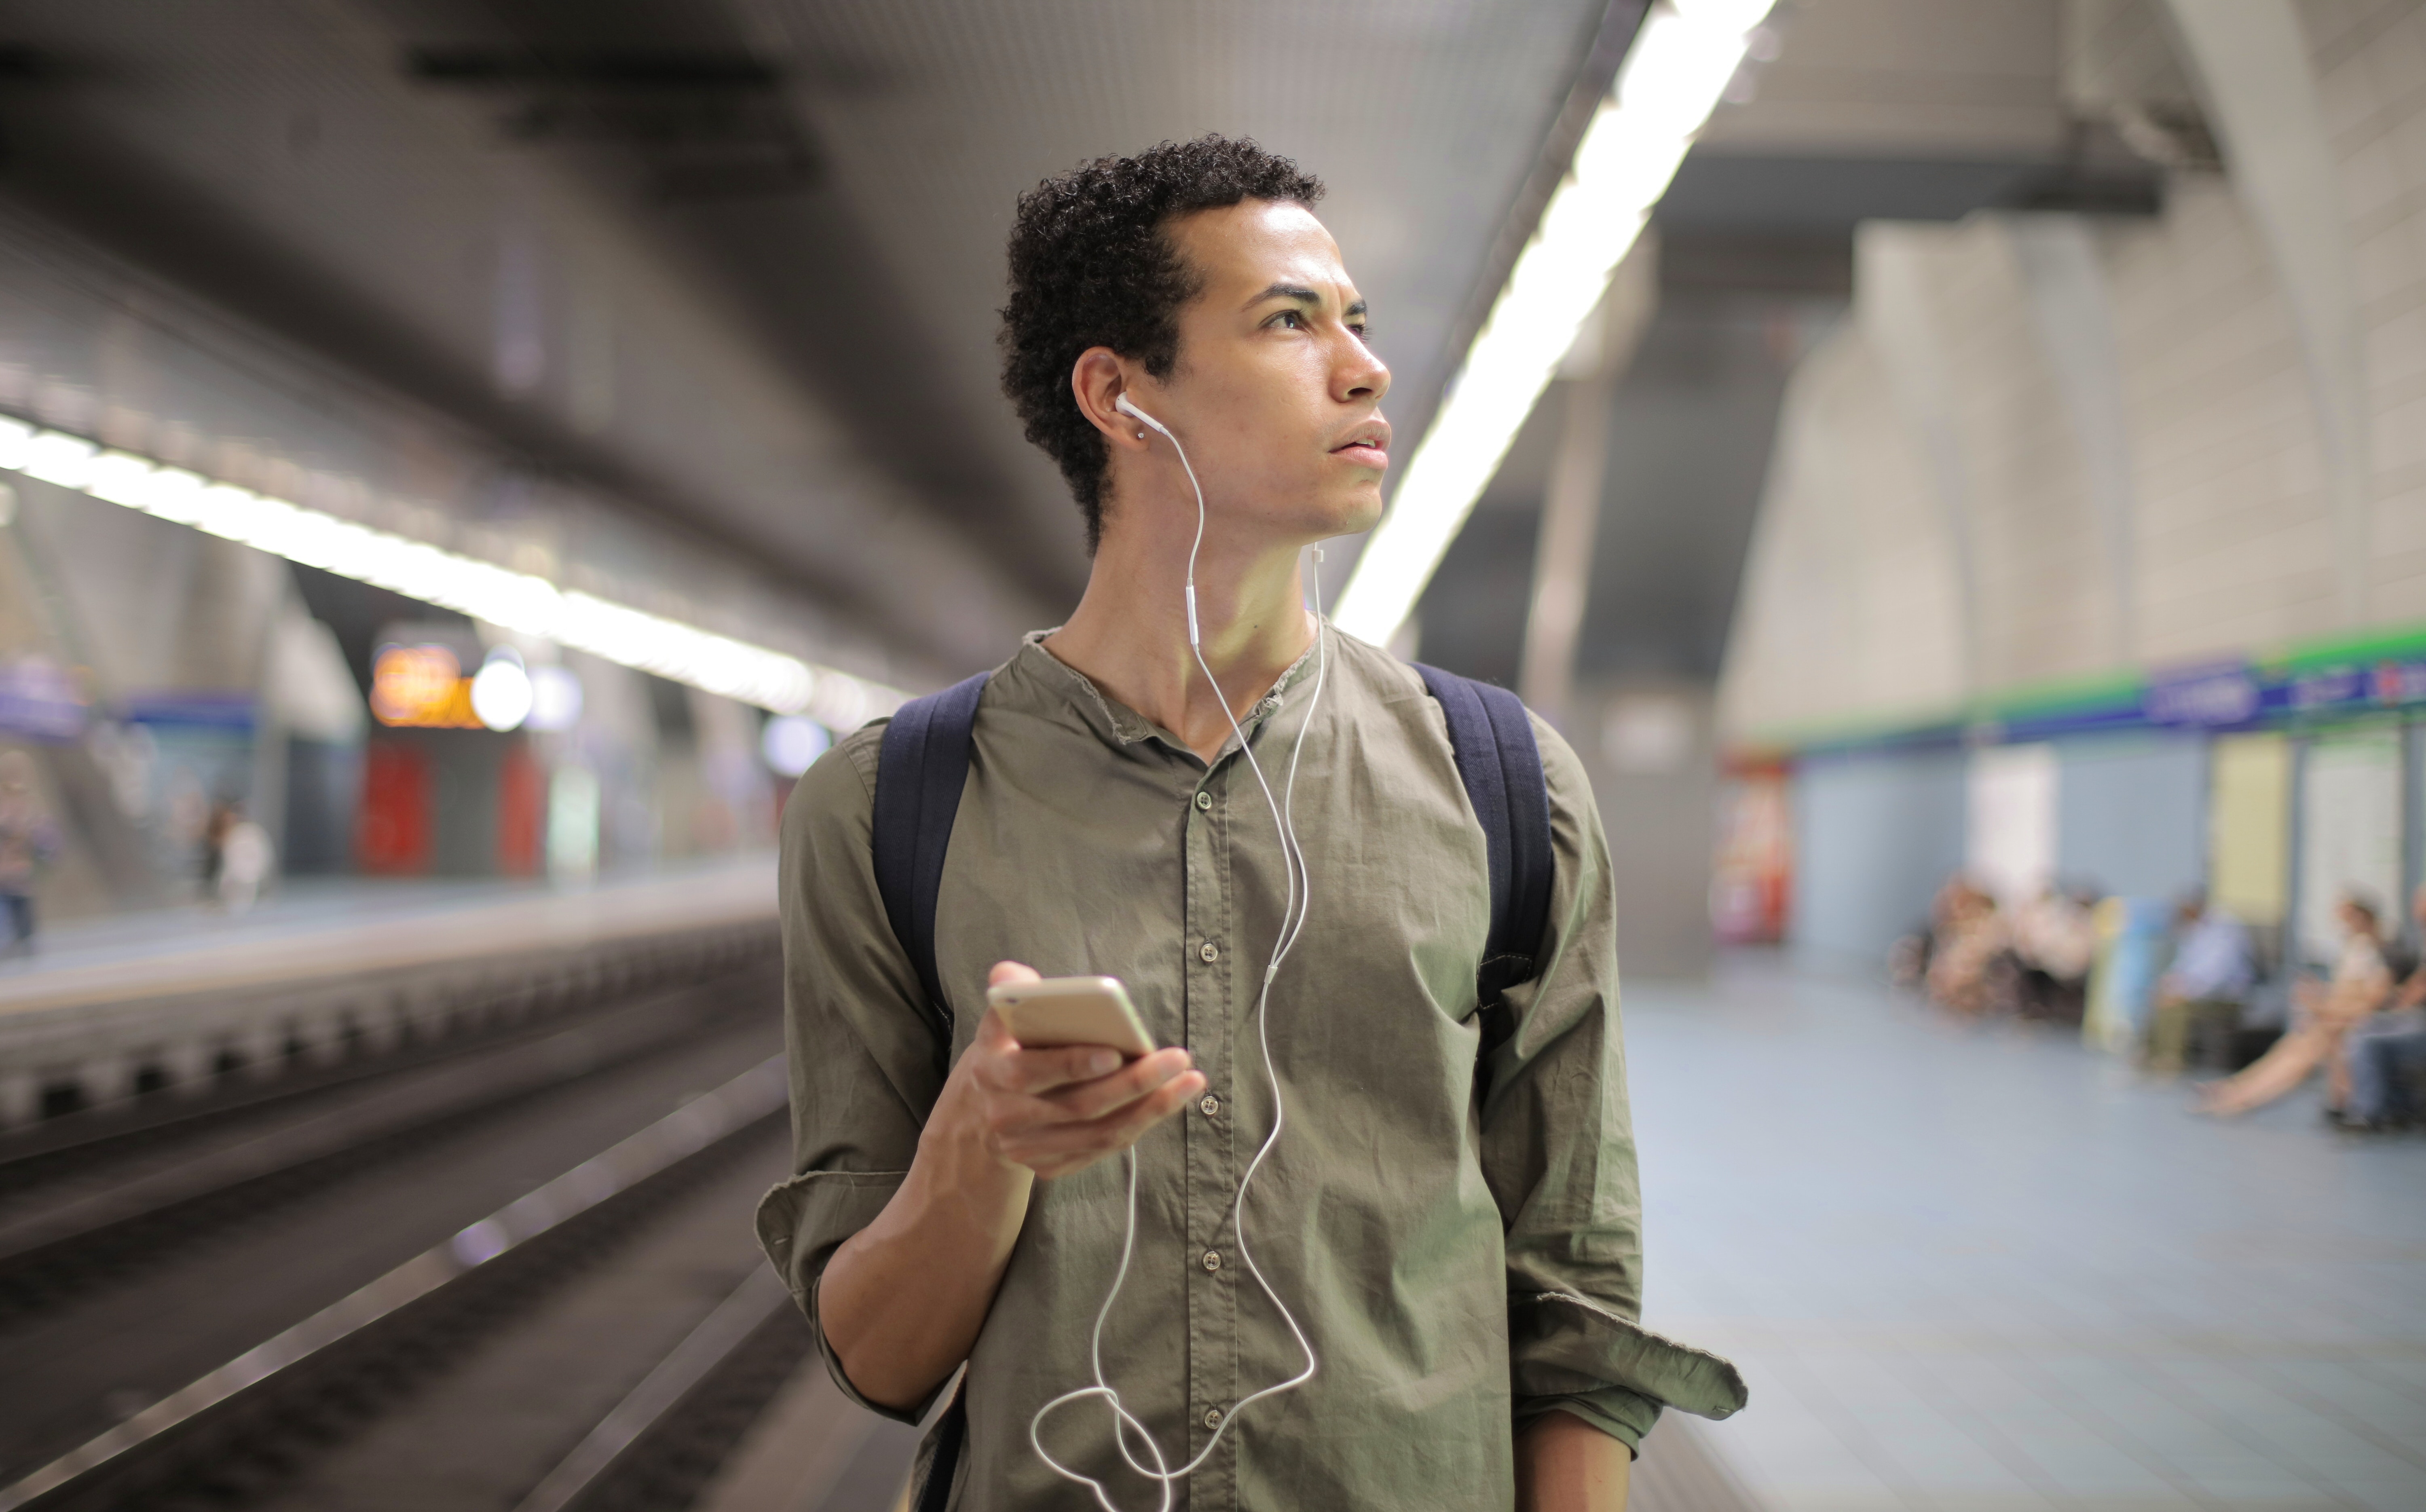 person wearing headphones while holding phone and looking to the side in a subway station